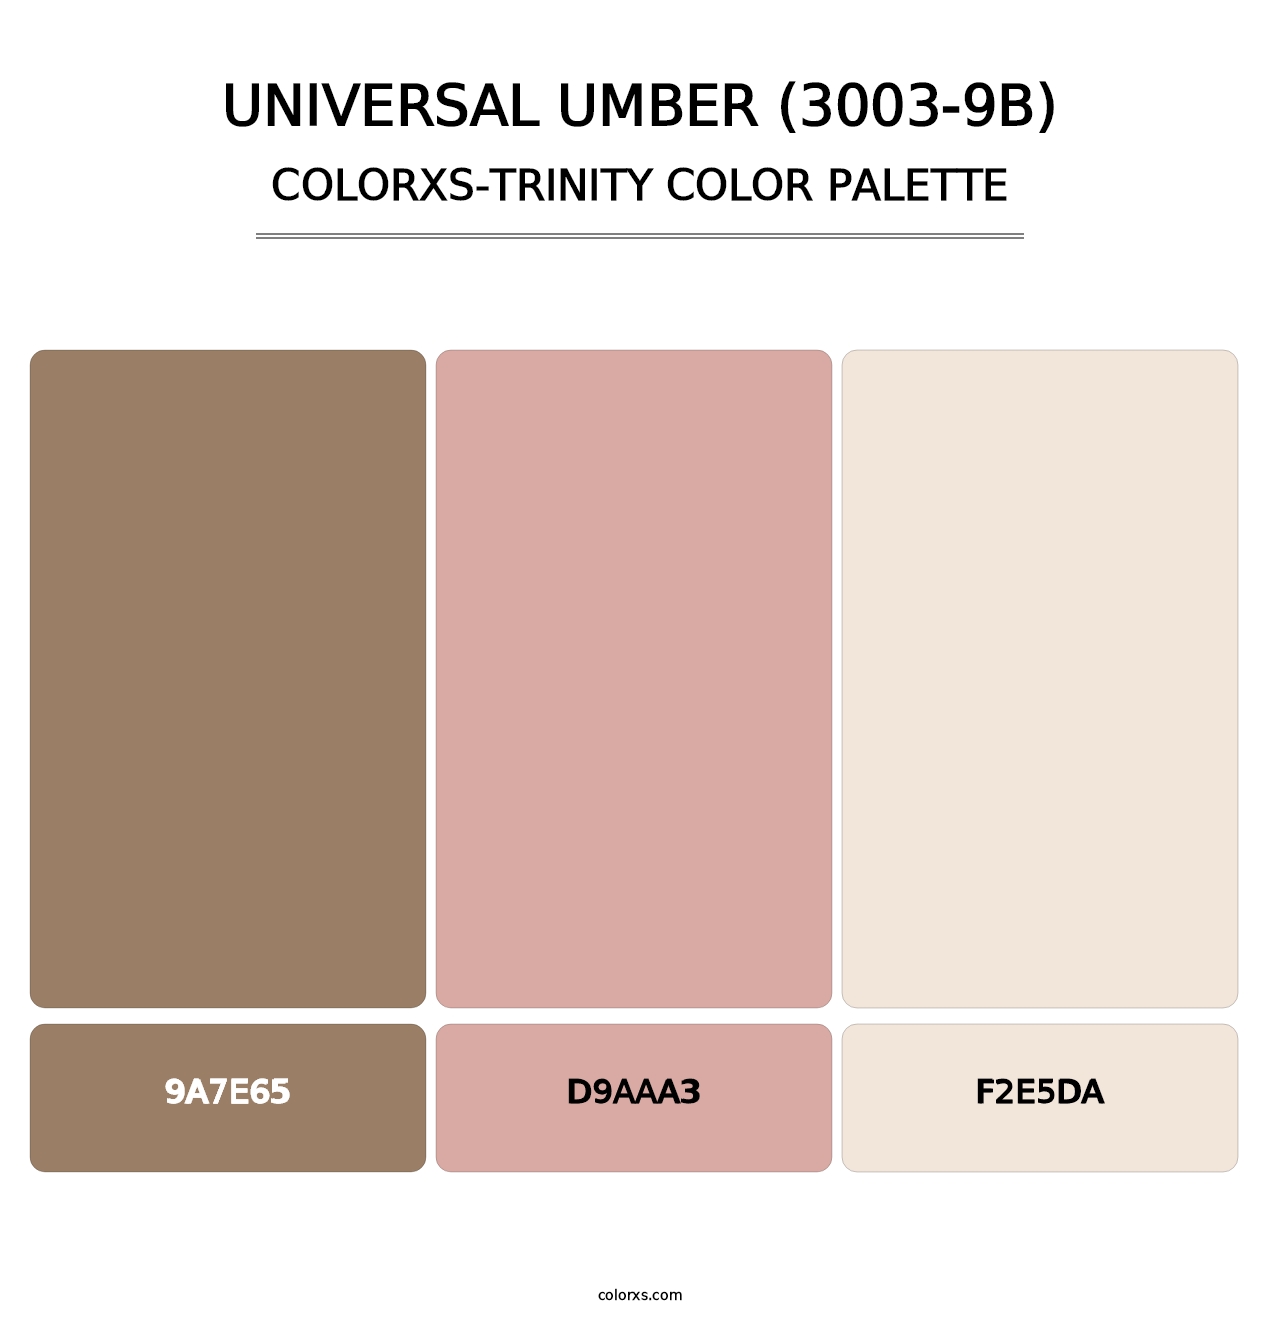 Universal Umber (3003-9B) - Colorxs Trinity Palette